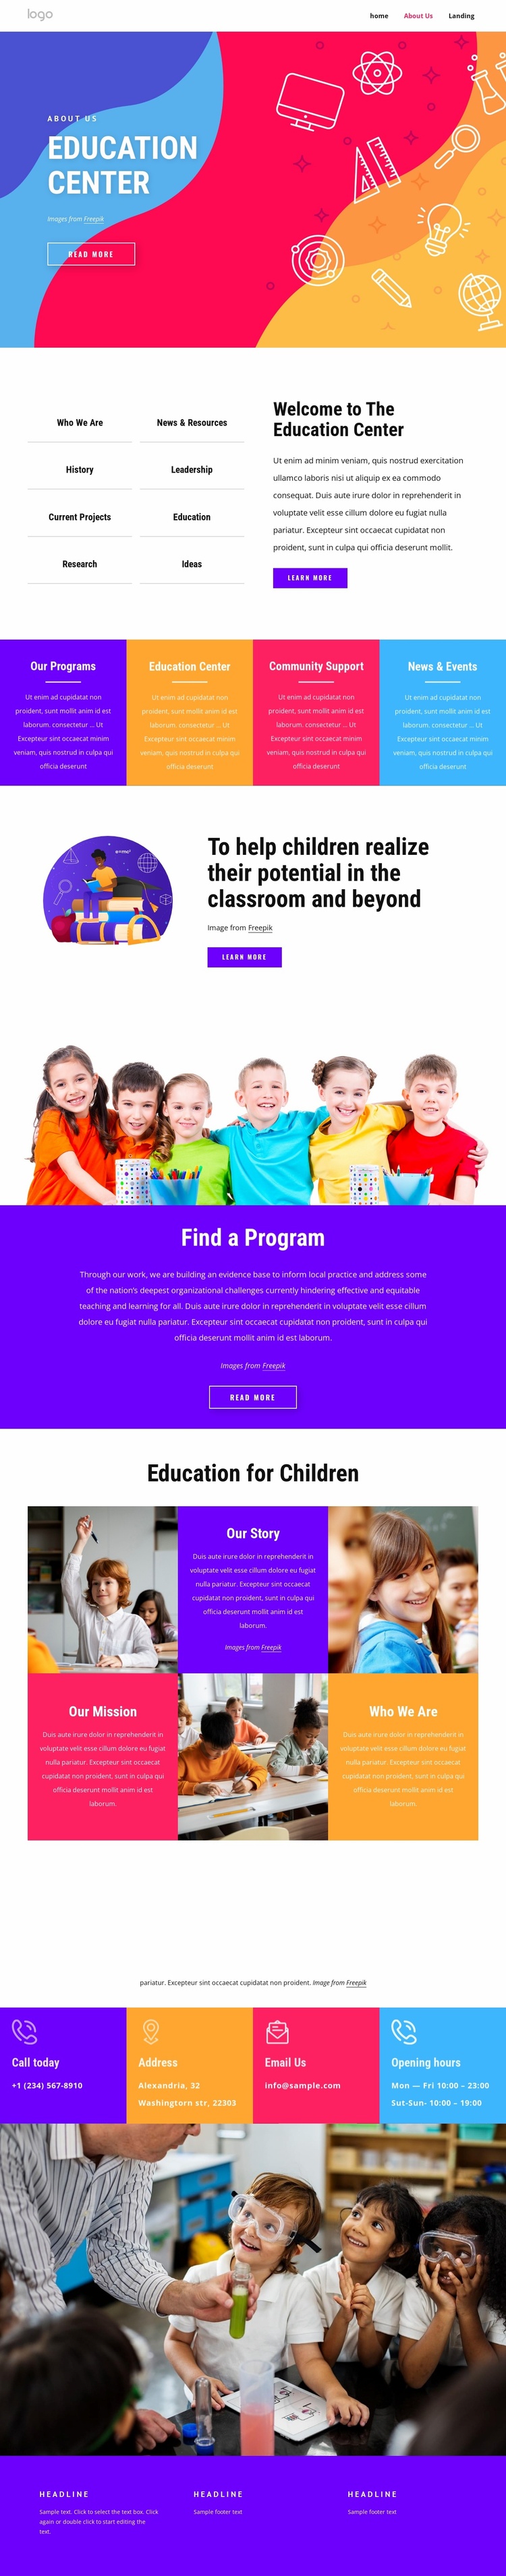 Family and education center Landing Page